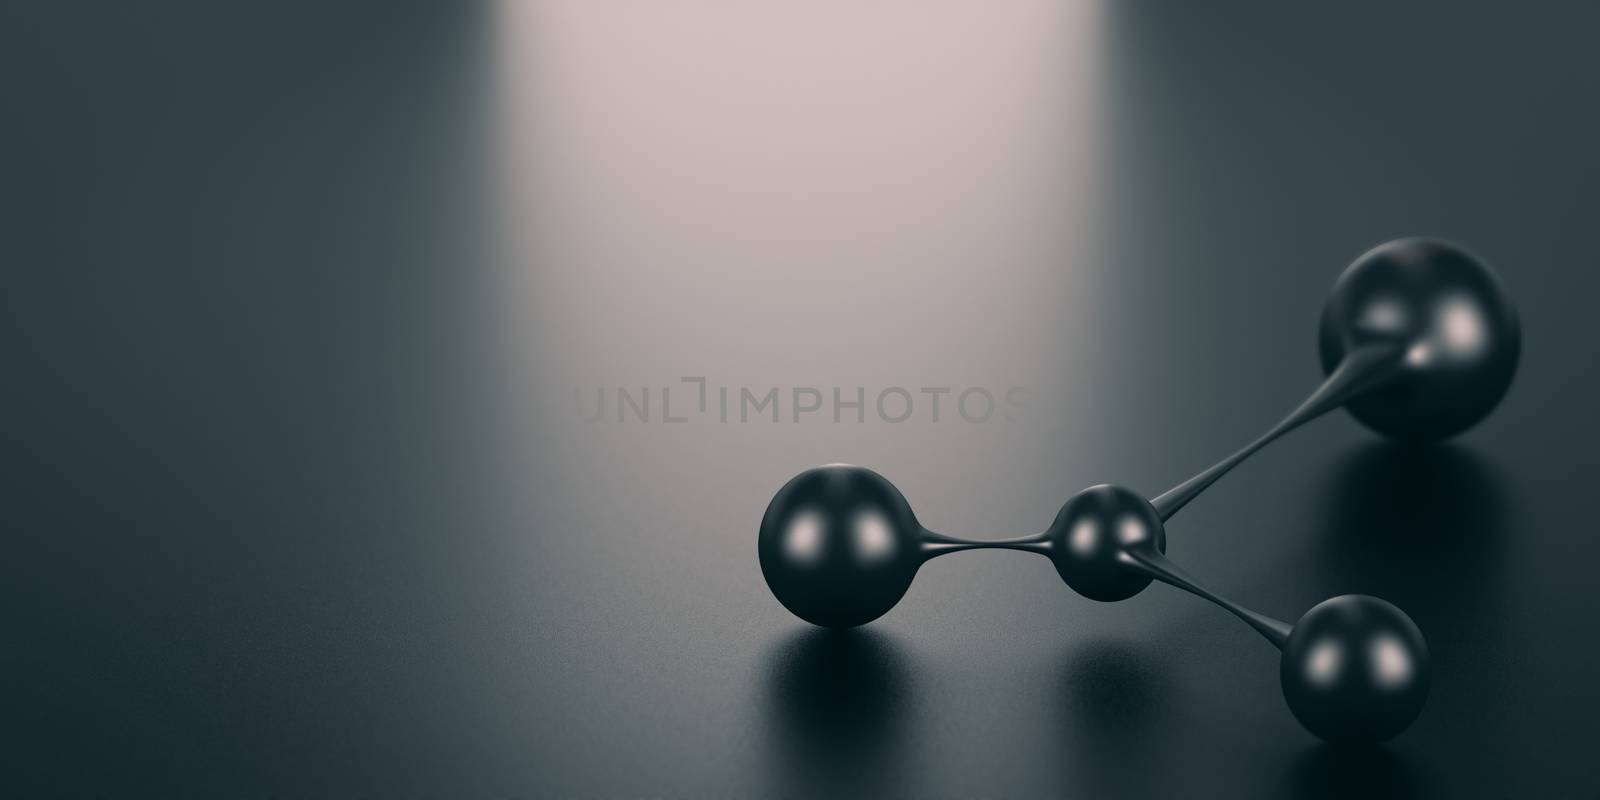 3D illustration of a network symbol over black background with light effect. Connexion concept.